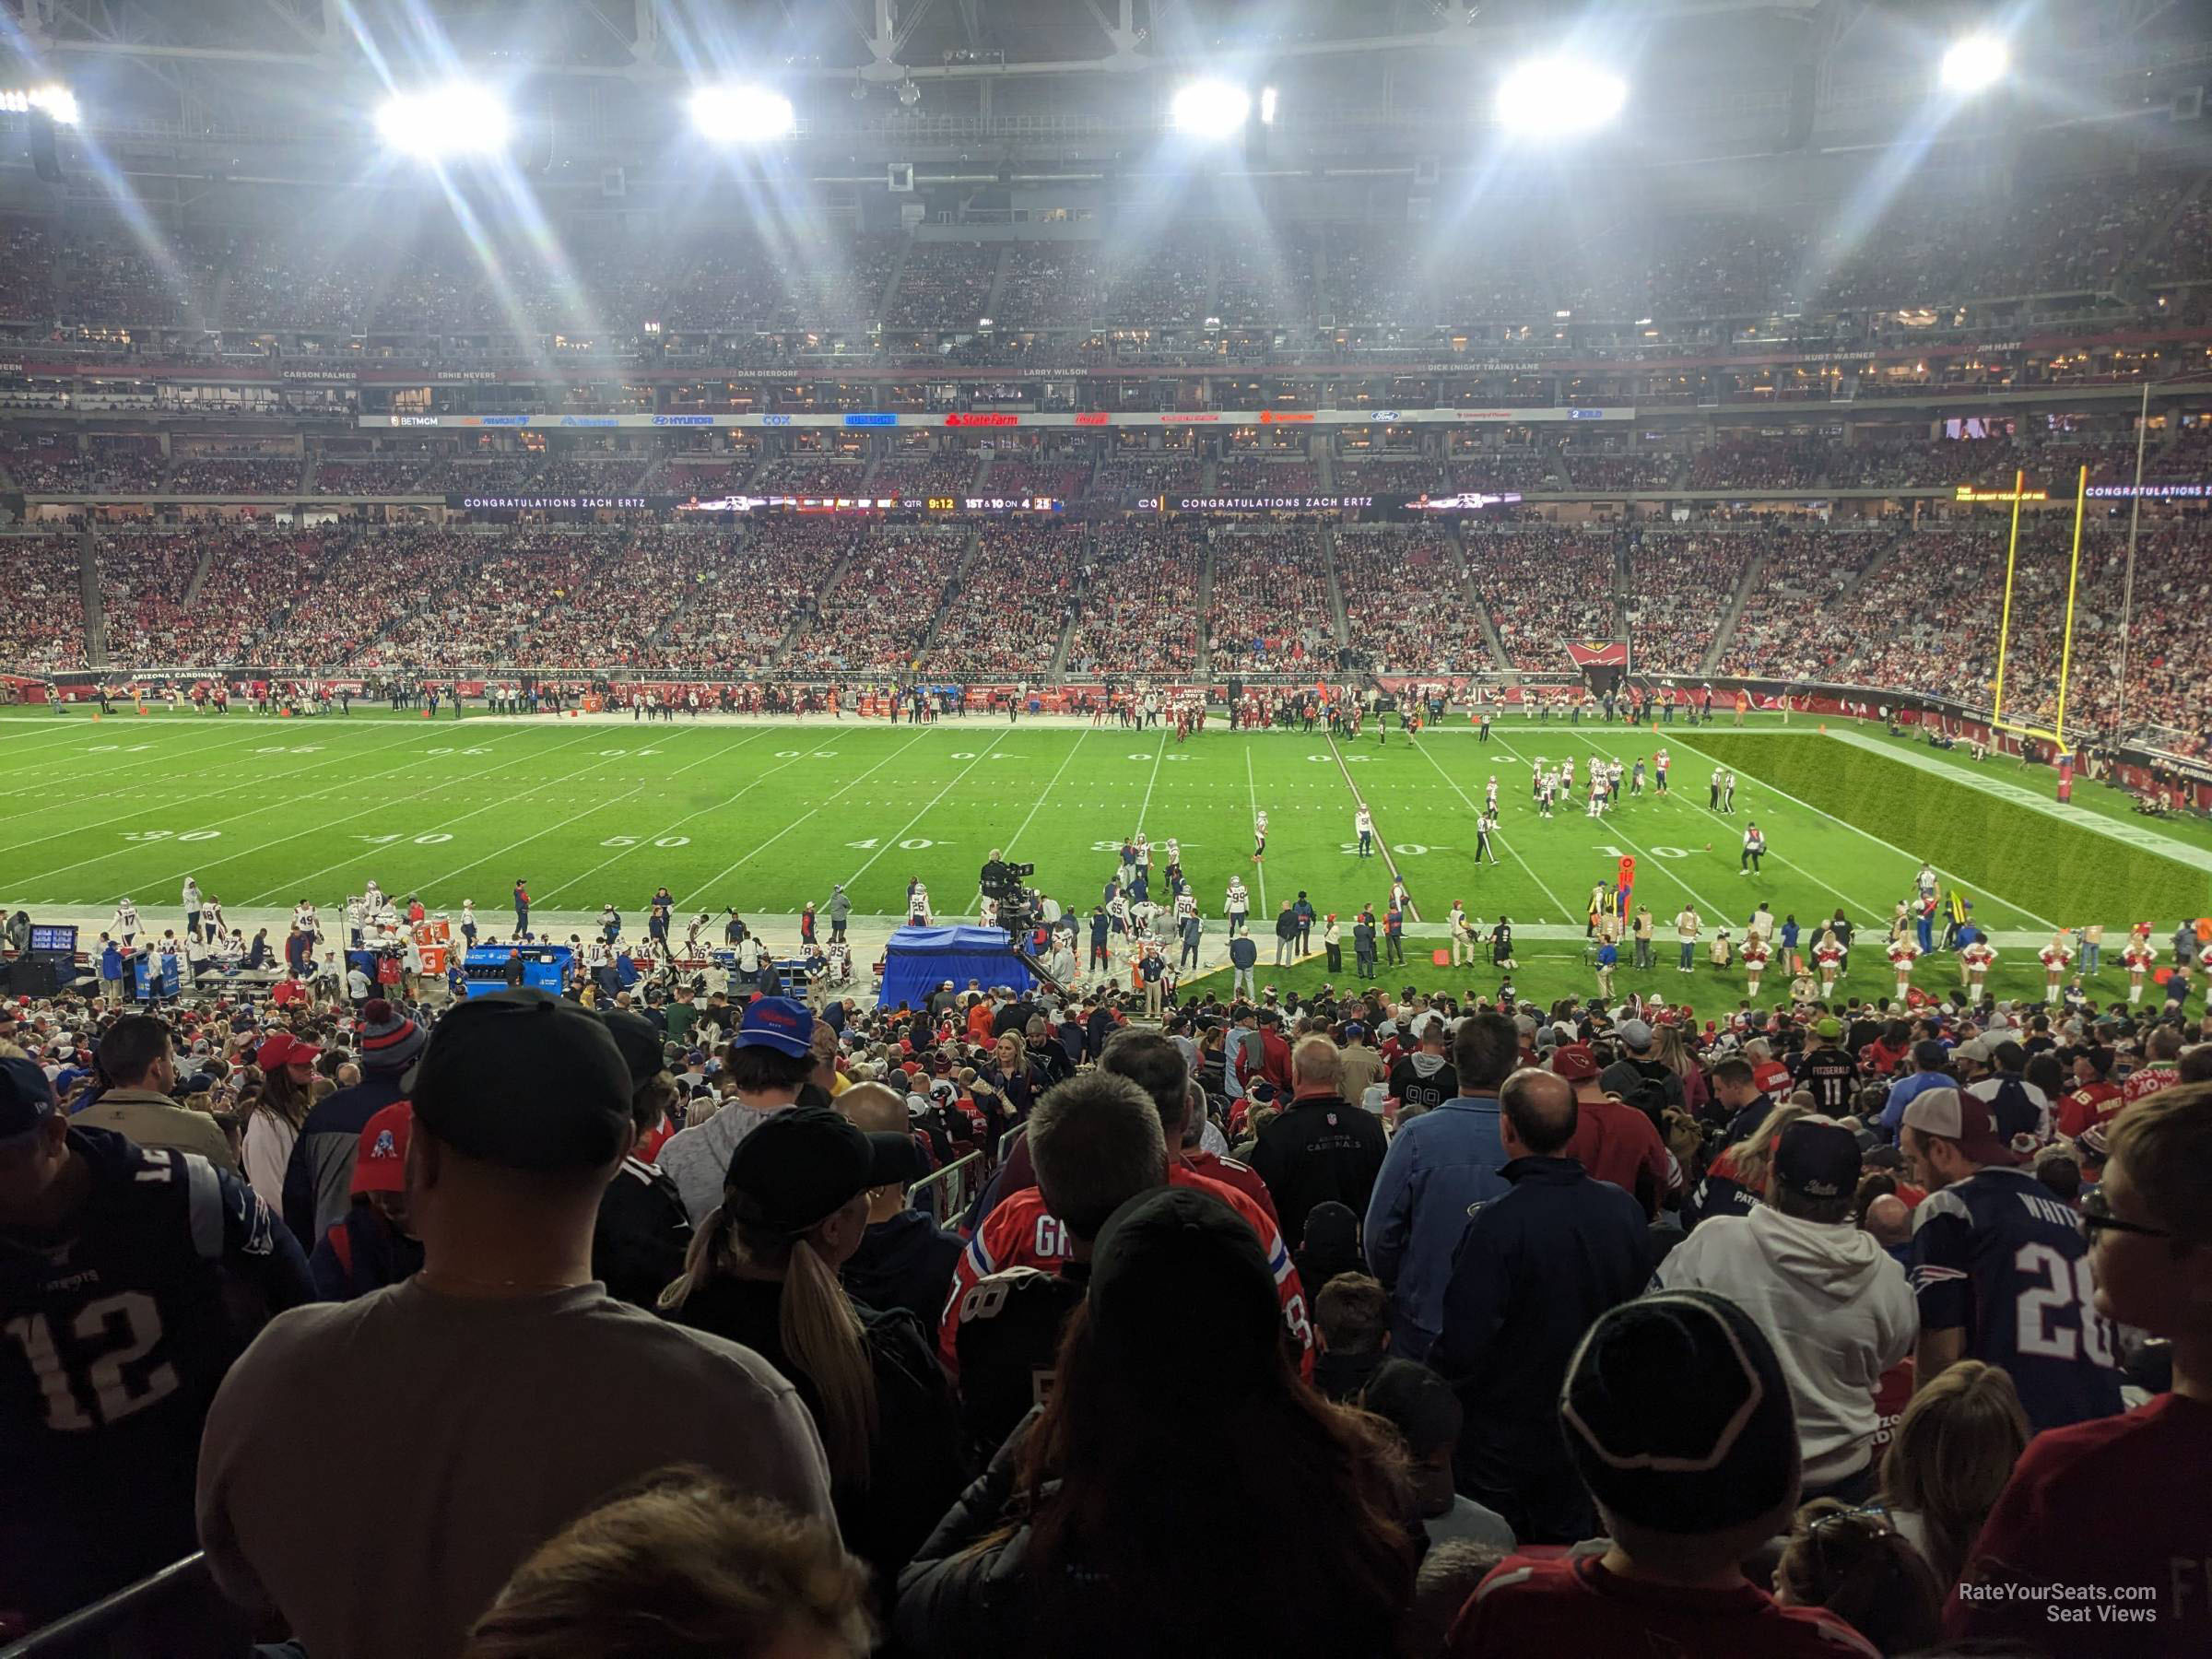 section 127, row 41 seat view  for football - state farm stadium